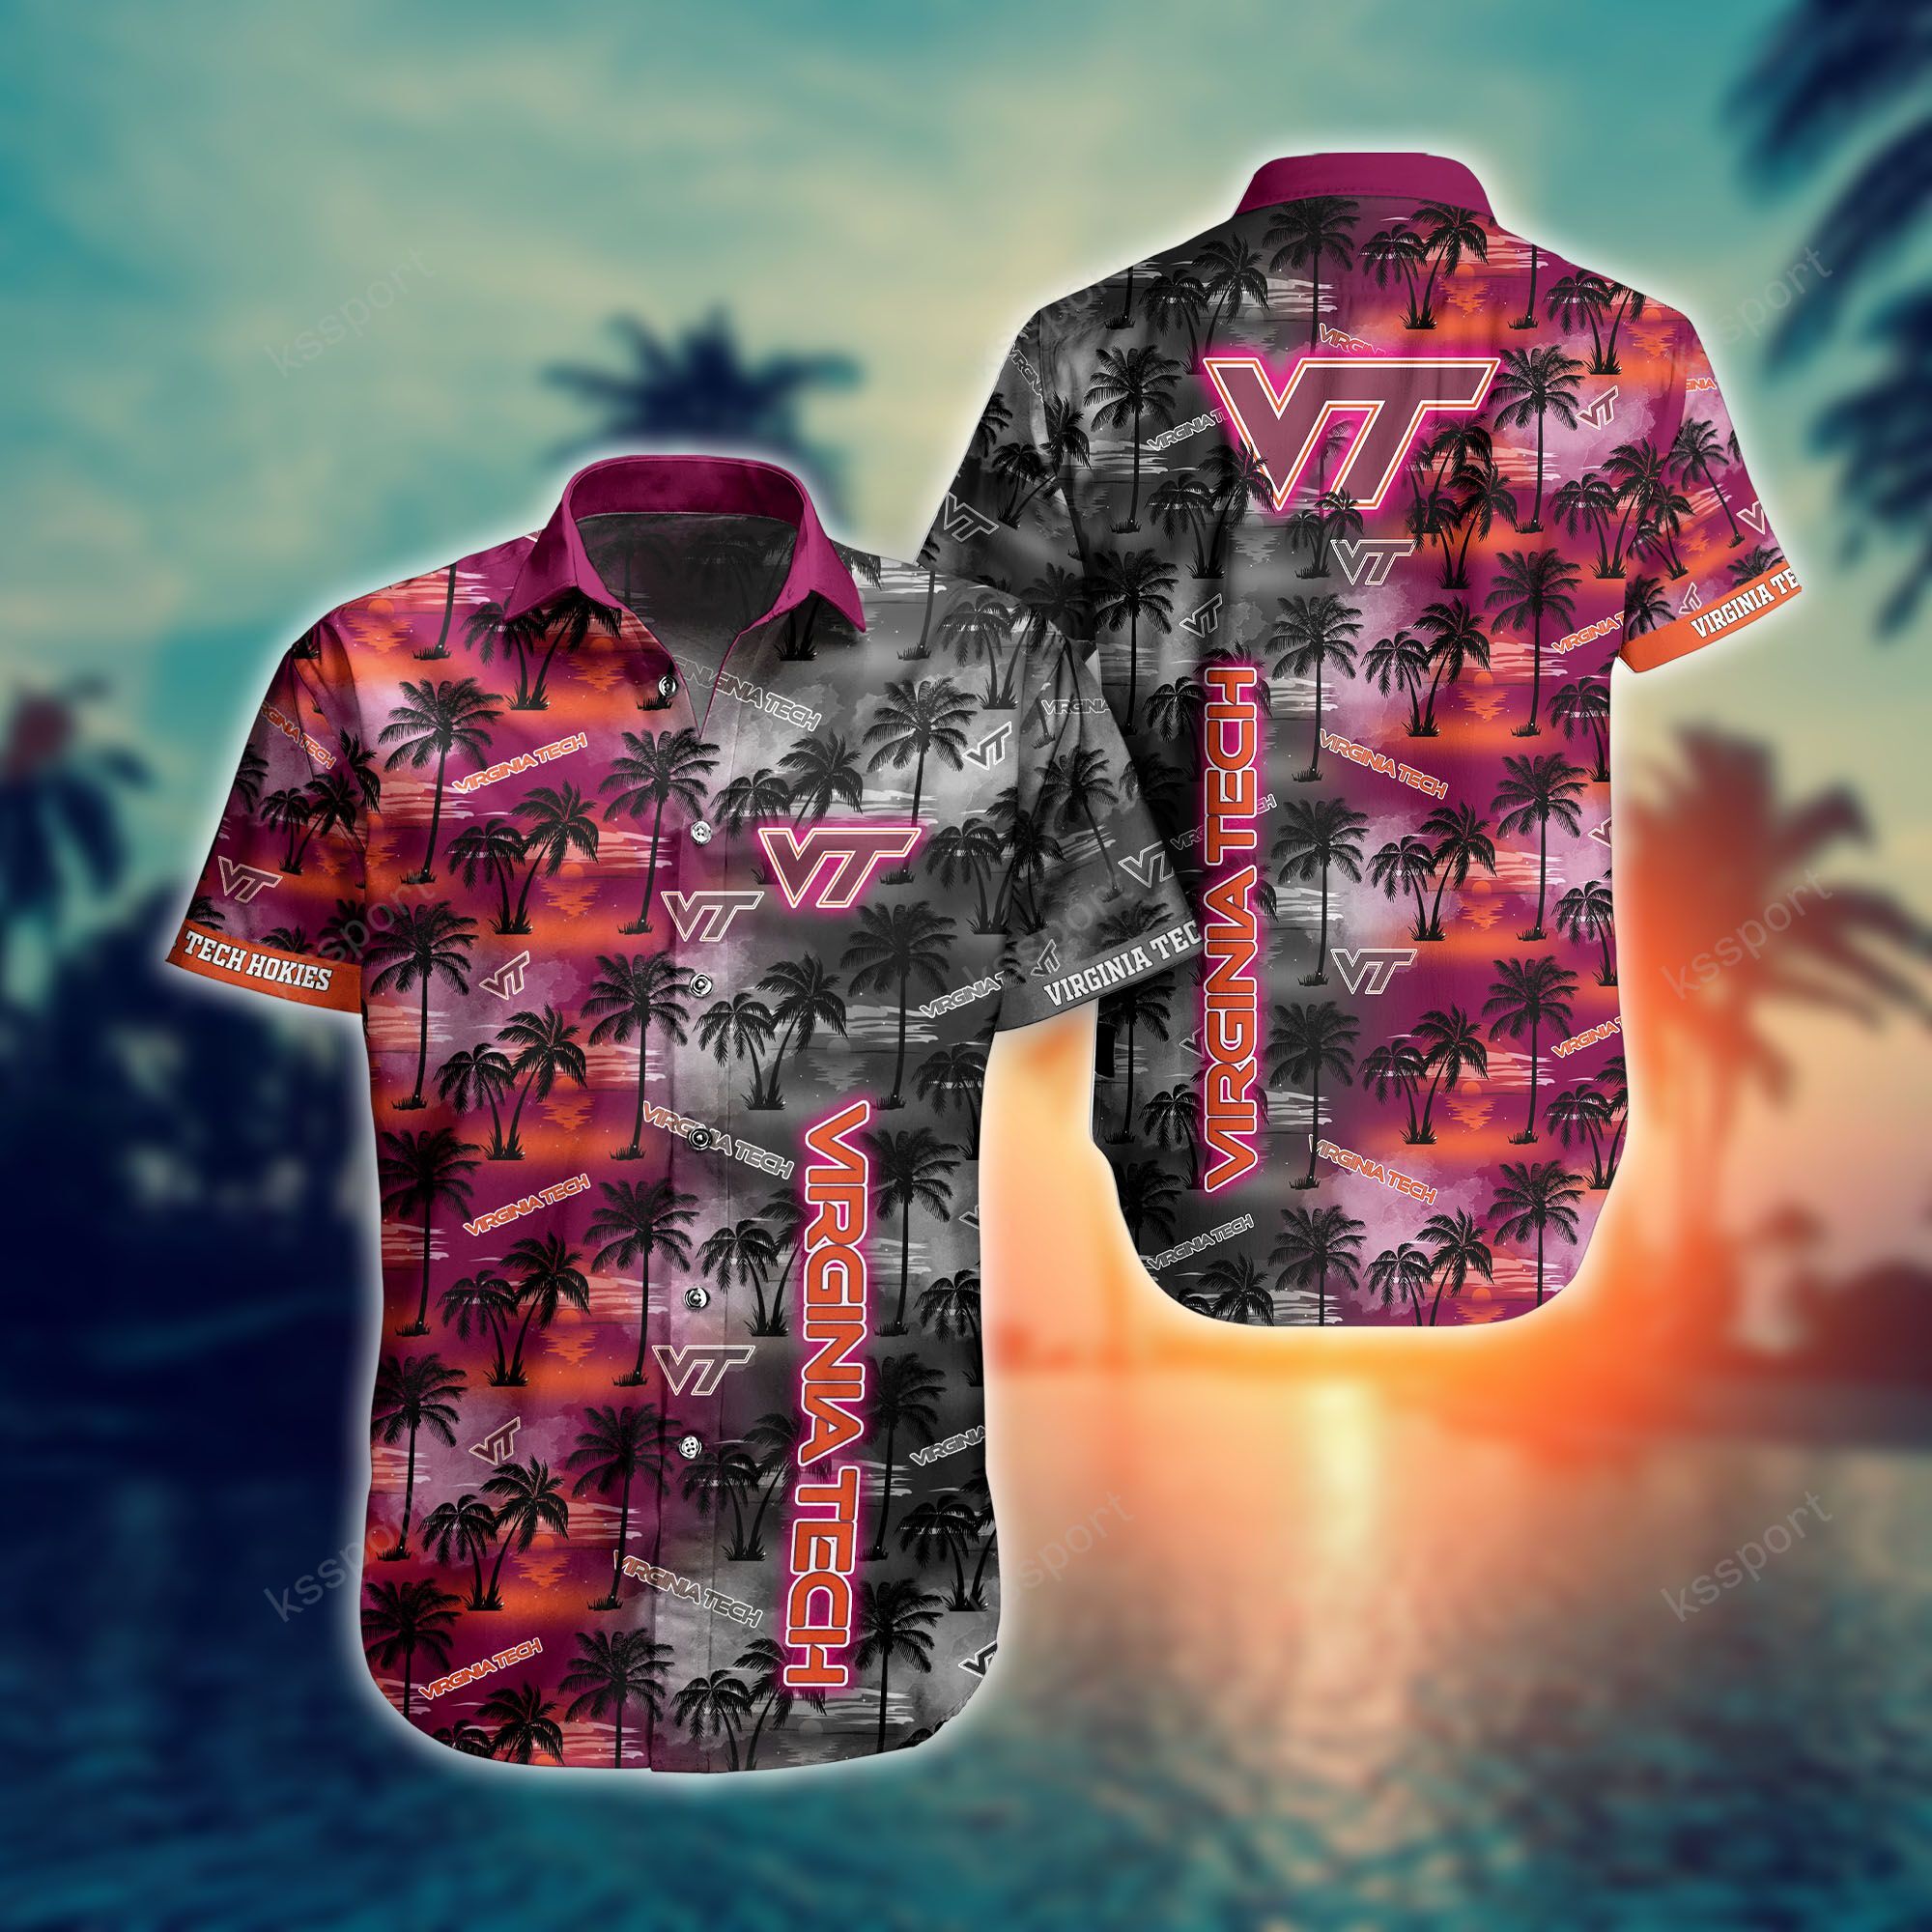 Treat yourself to a cool Hawaiian set today! 73